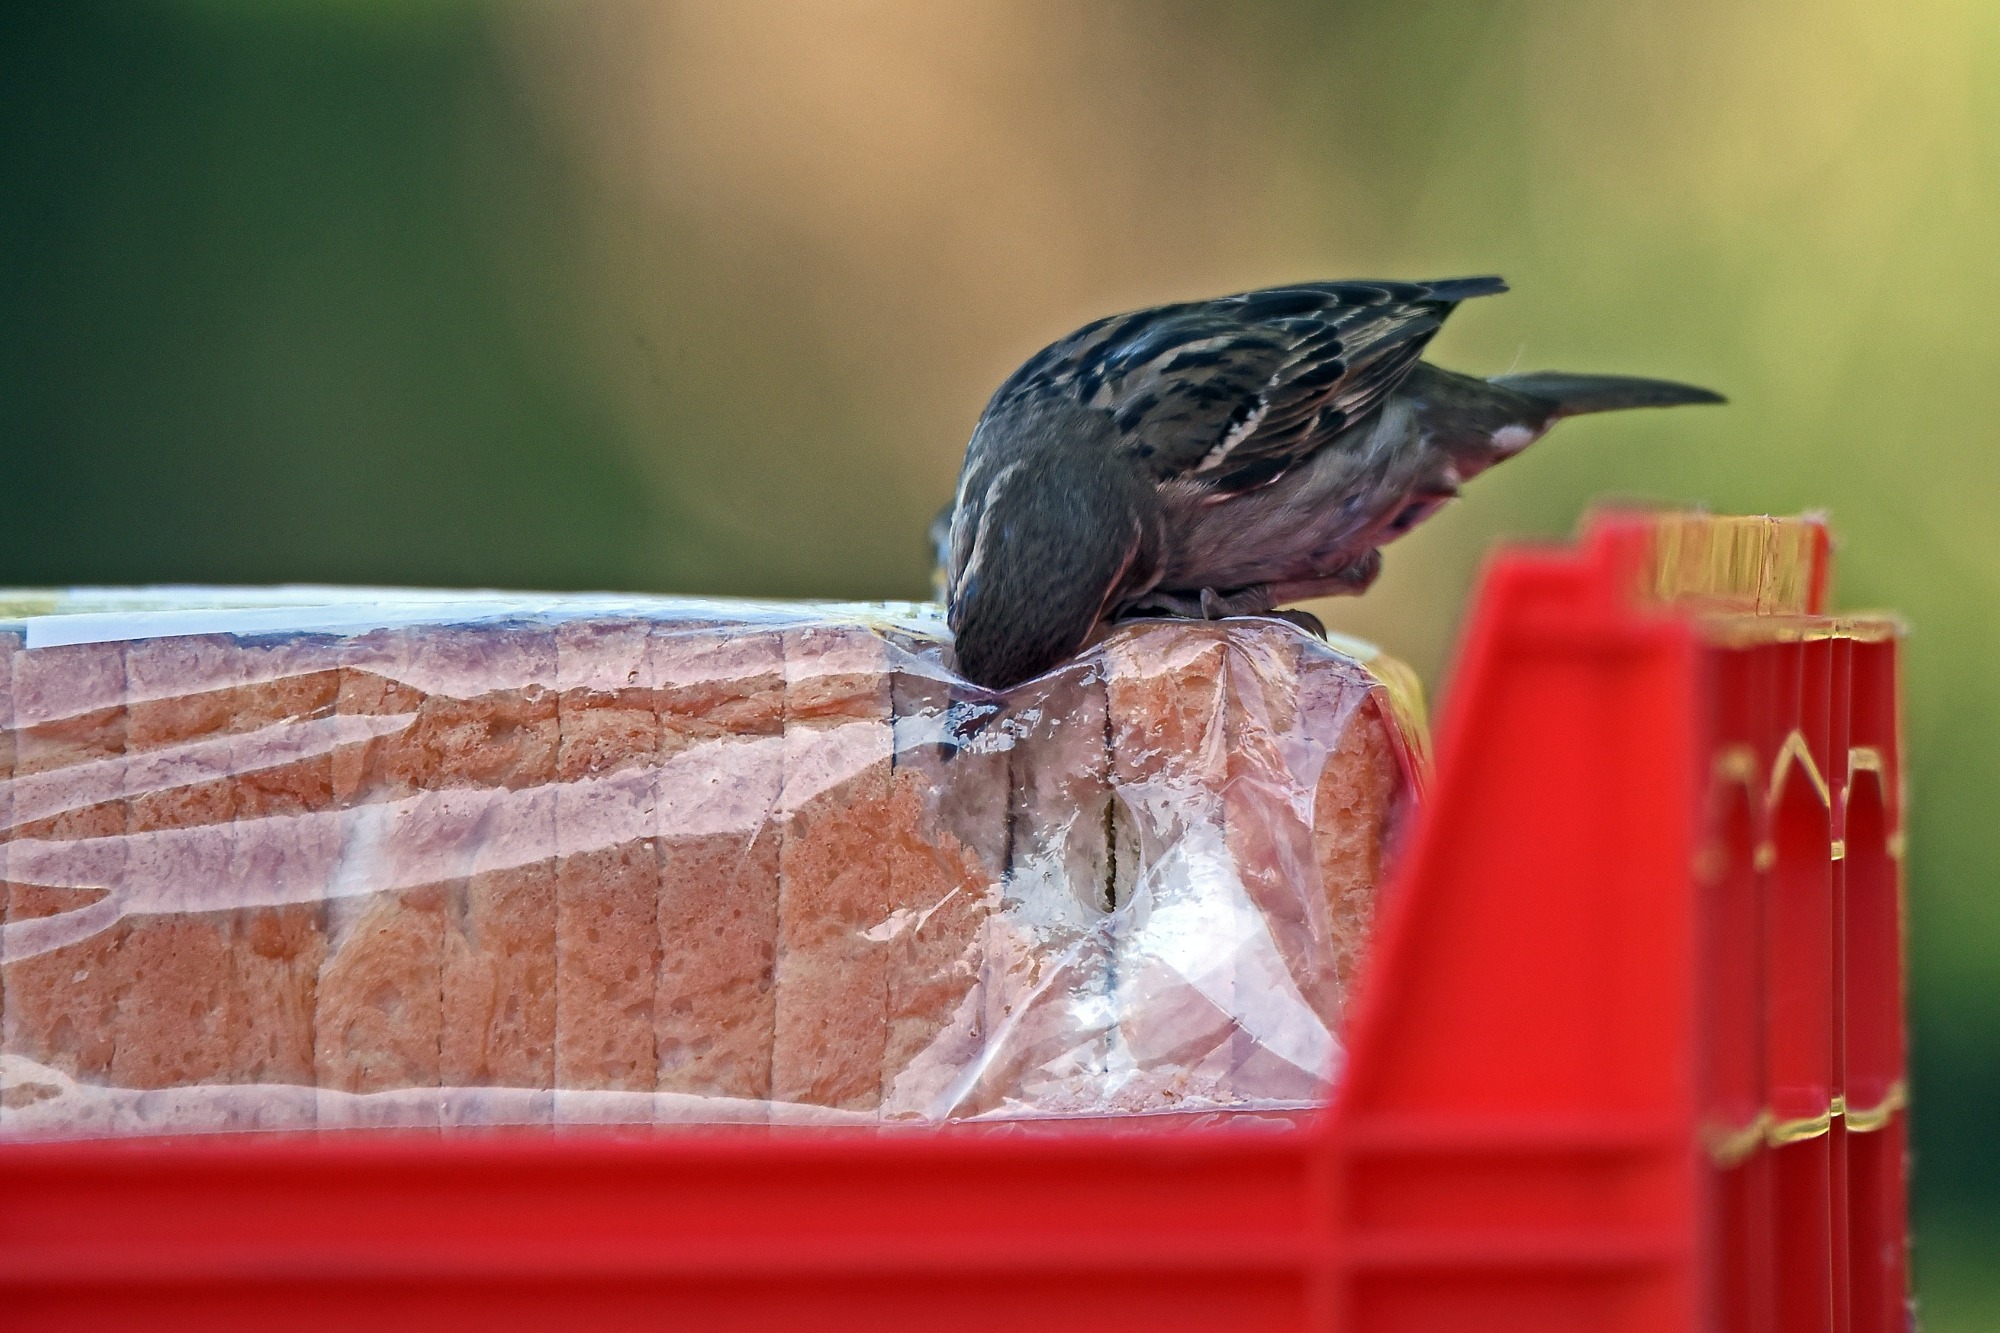 A bird stealing from a loaf of bread